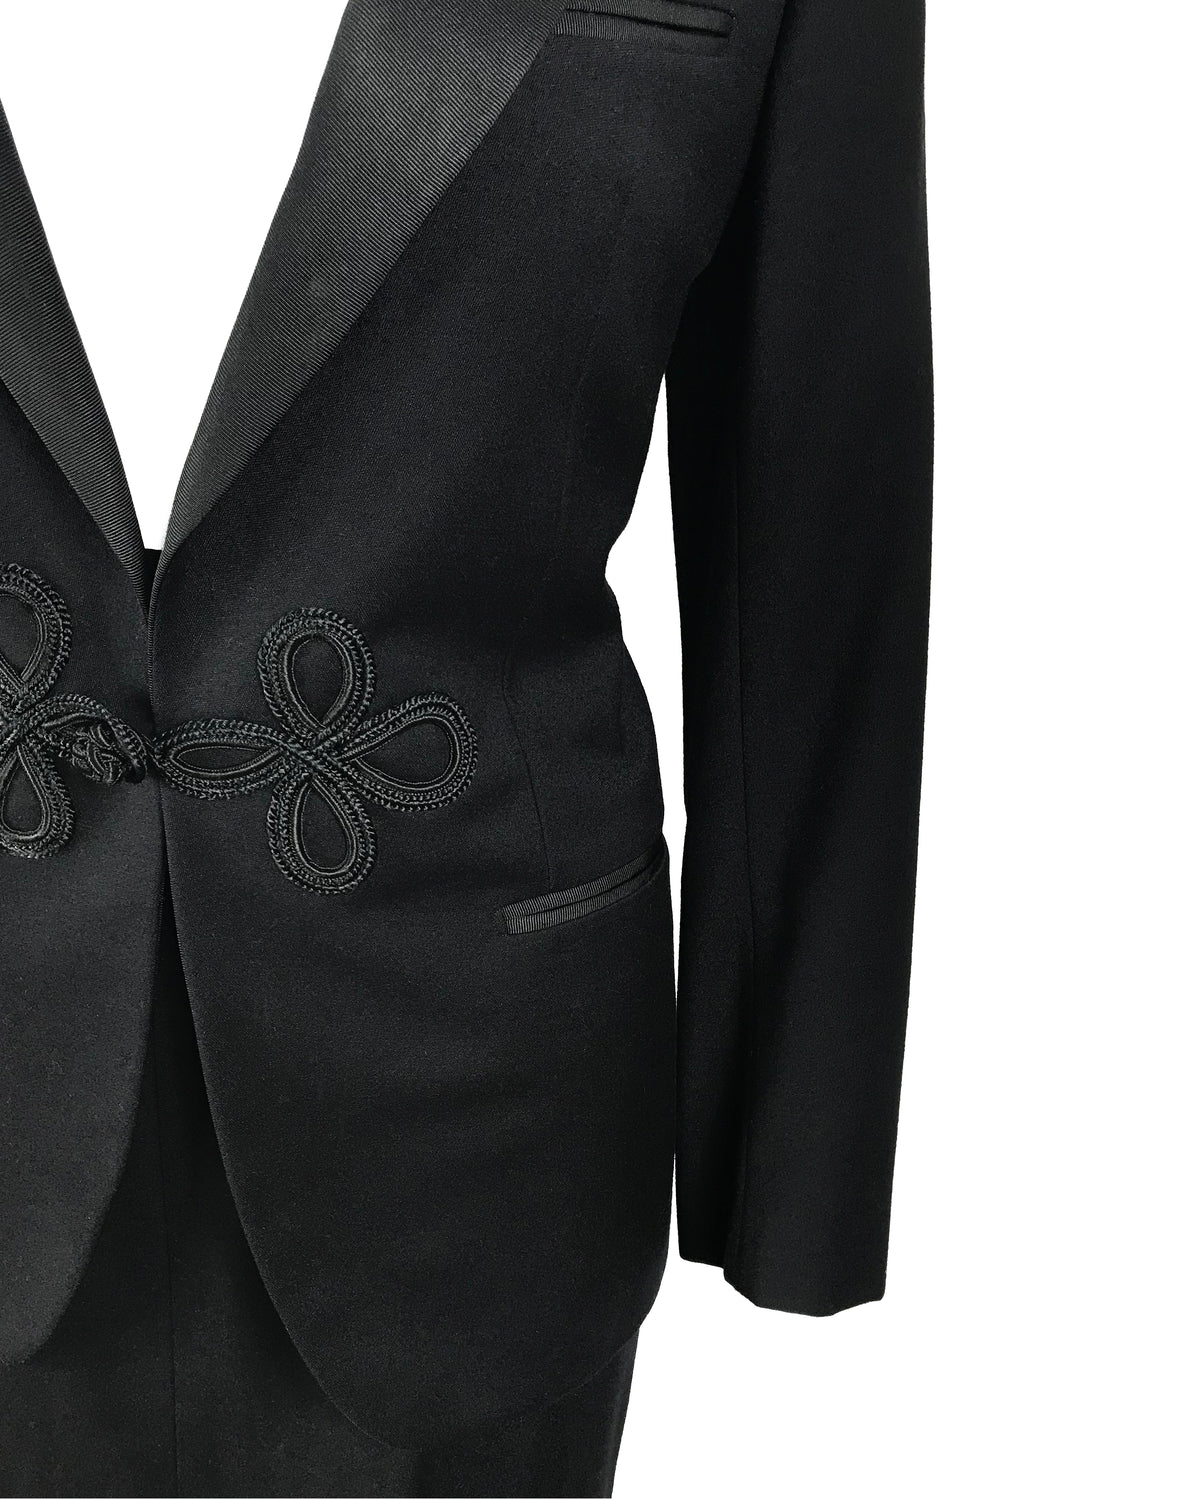 Gucci 1970s Black Smoking Two Piece Suit